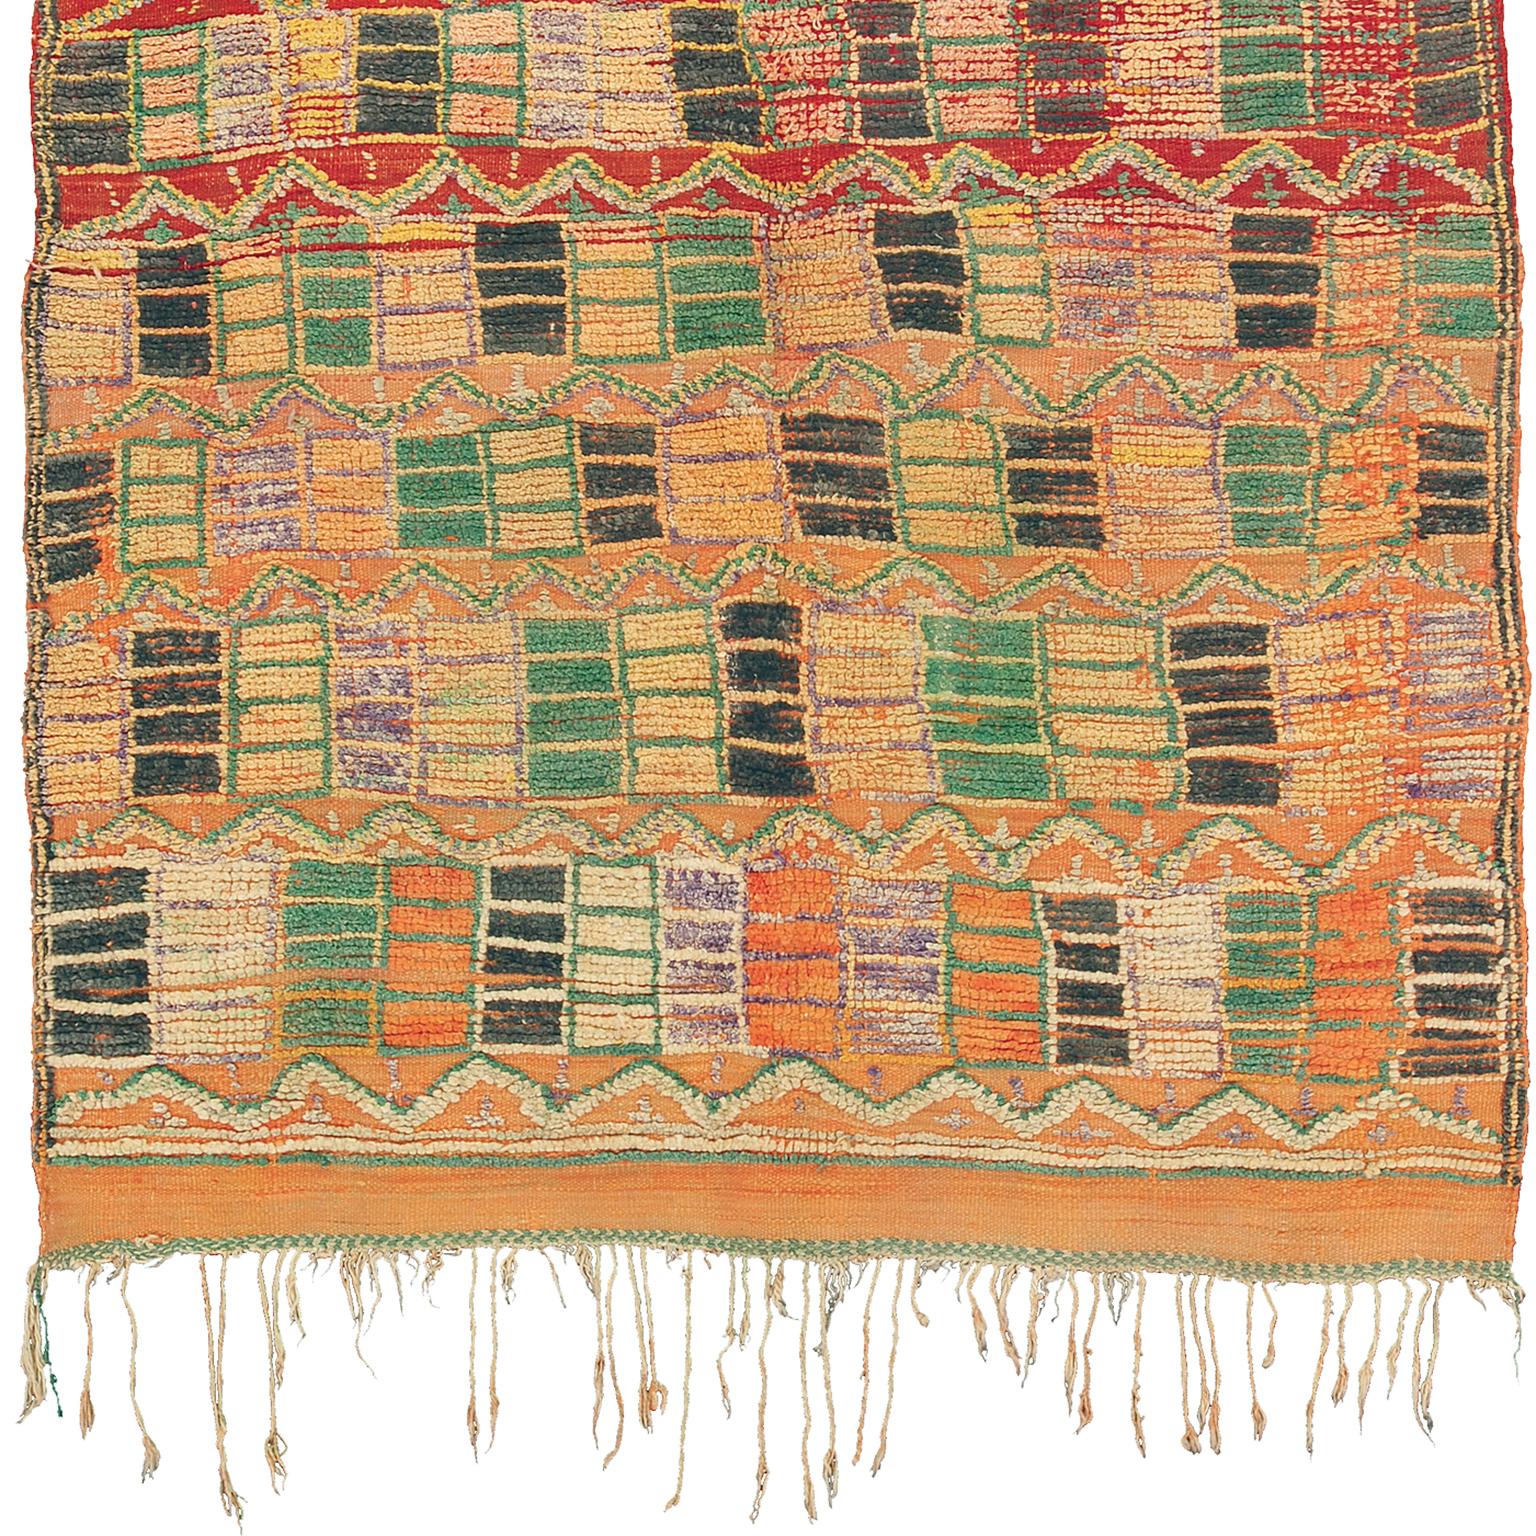 Mid-20th century Moroccan Azilal carpet
Ait Bou Ichaouen, Morocco. Mid-20th century.
Handwoven.